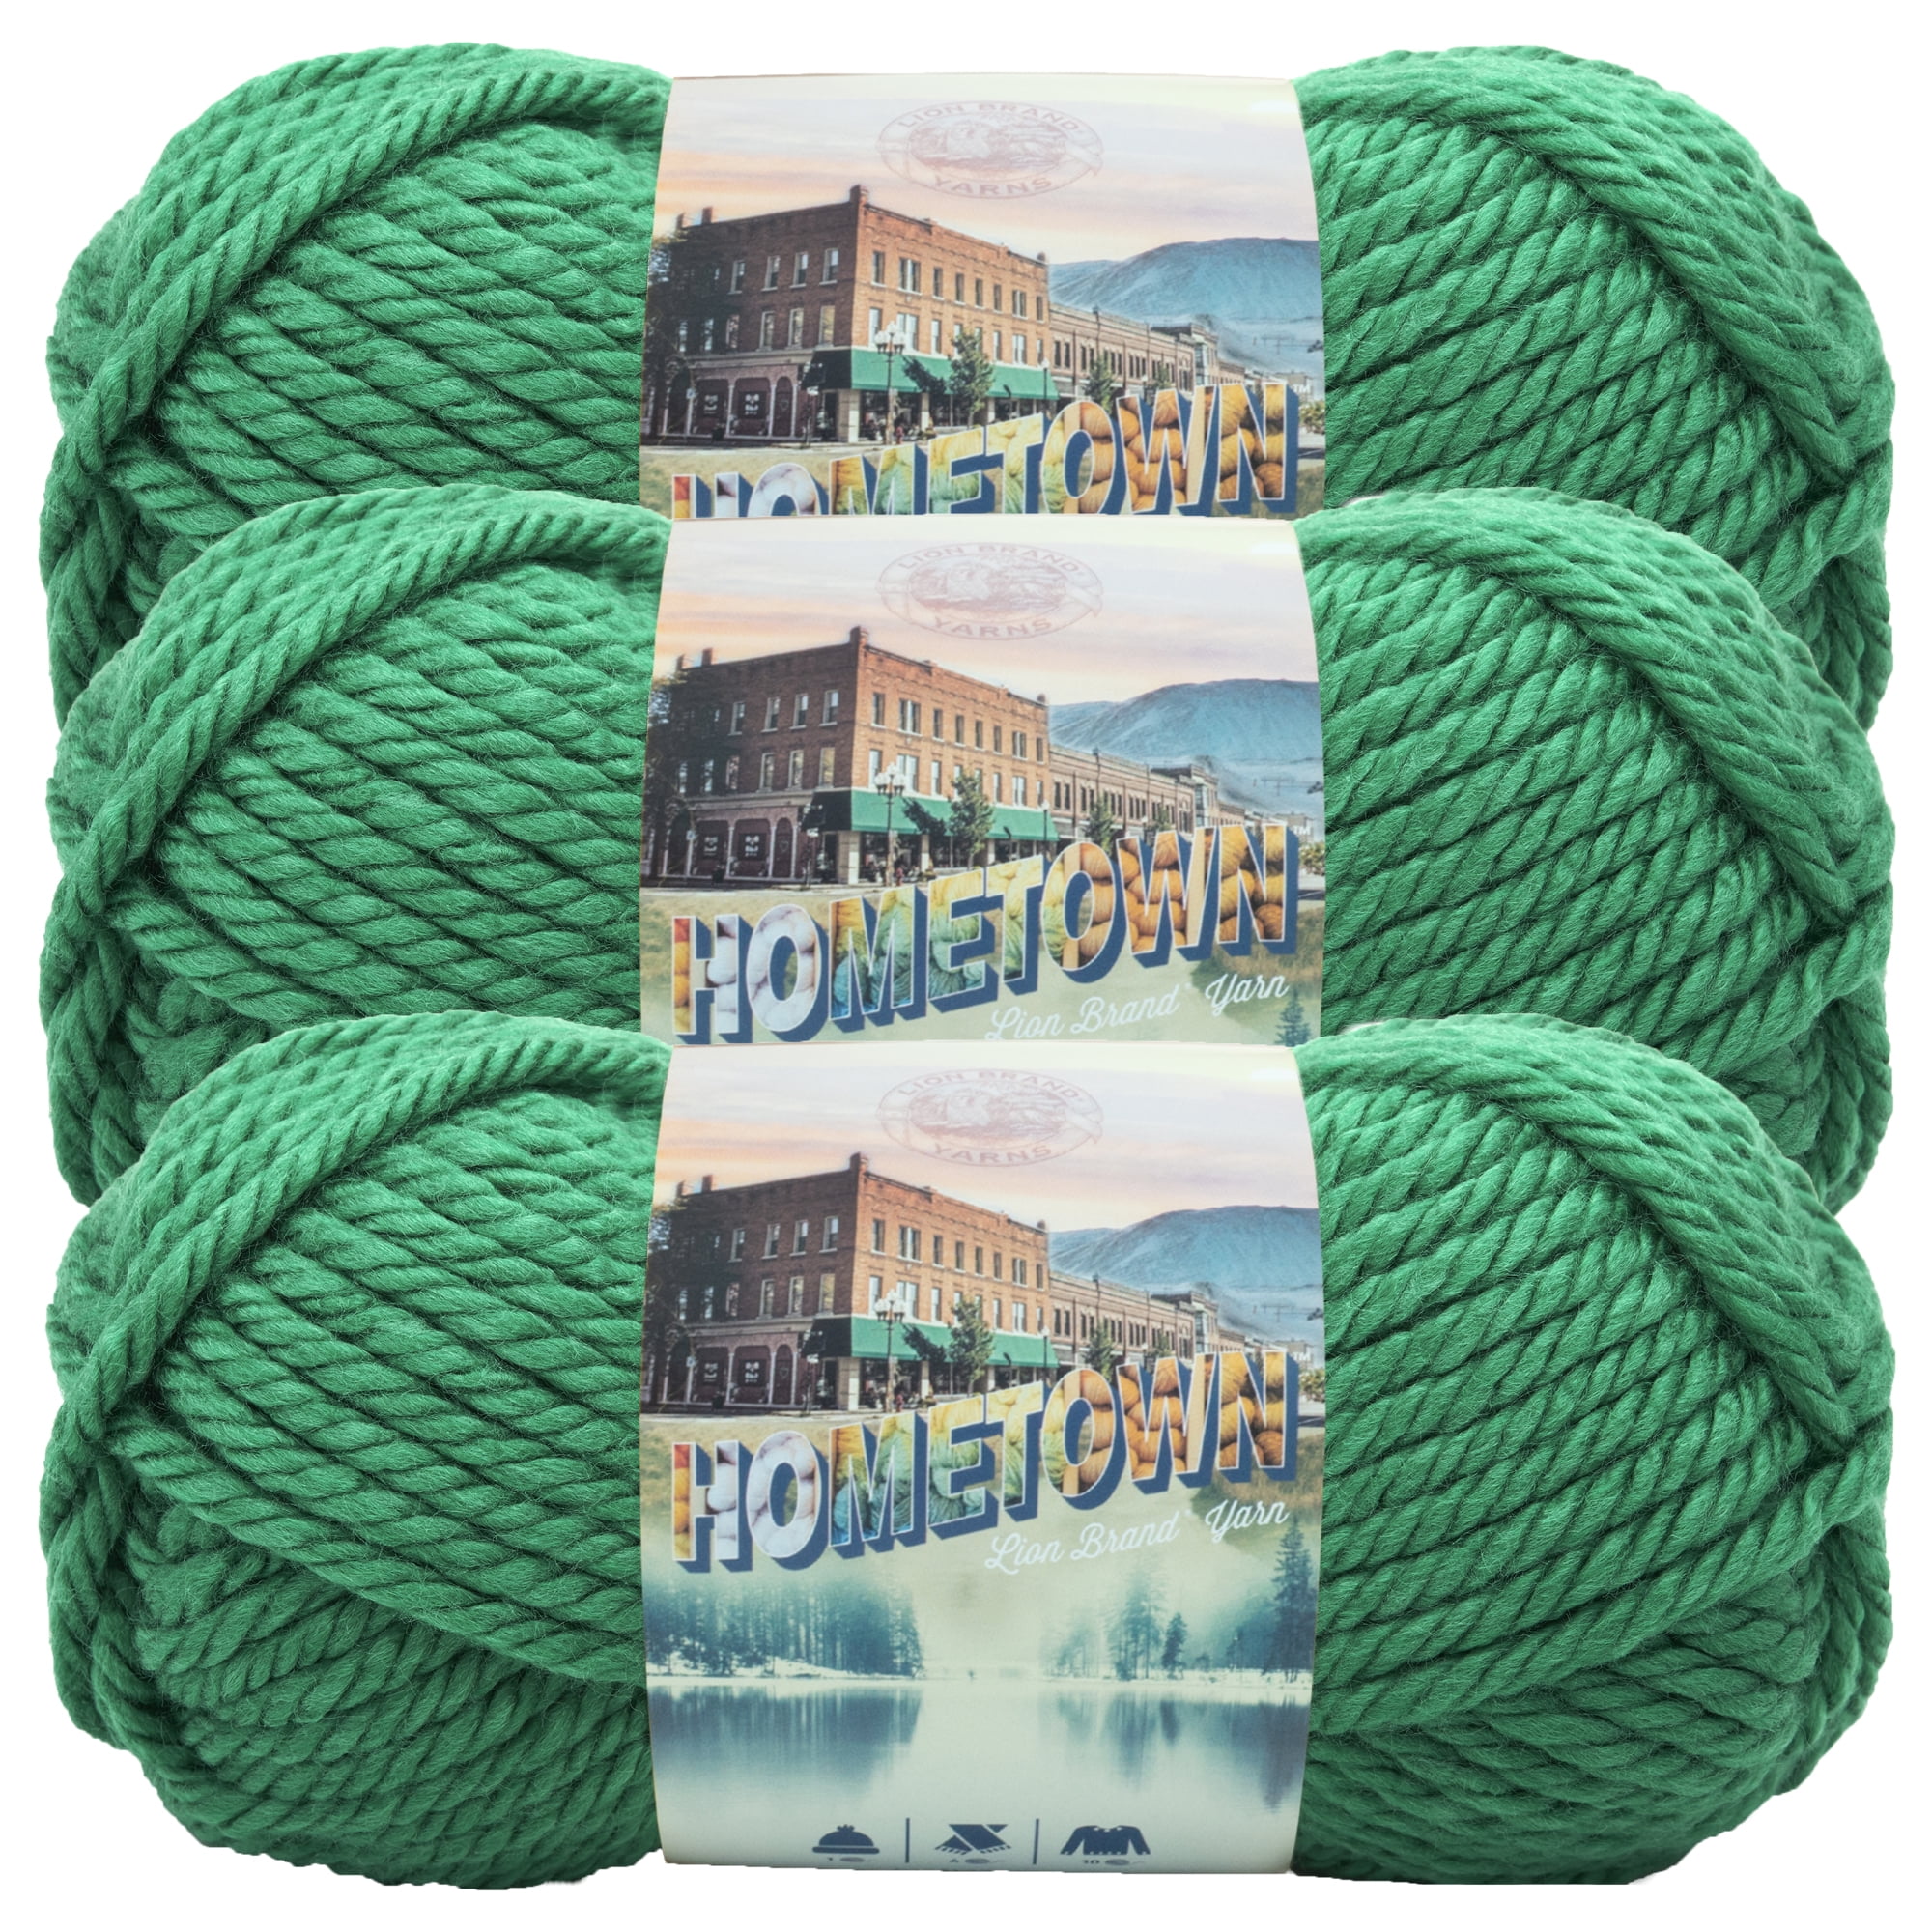 Yarn Lion Brand Yarn - Shop online and save up to 13%, UK